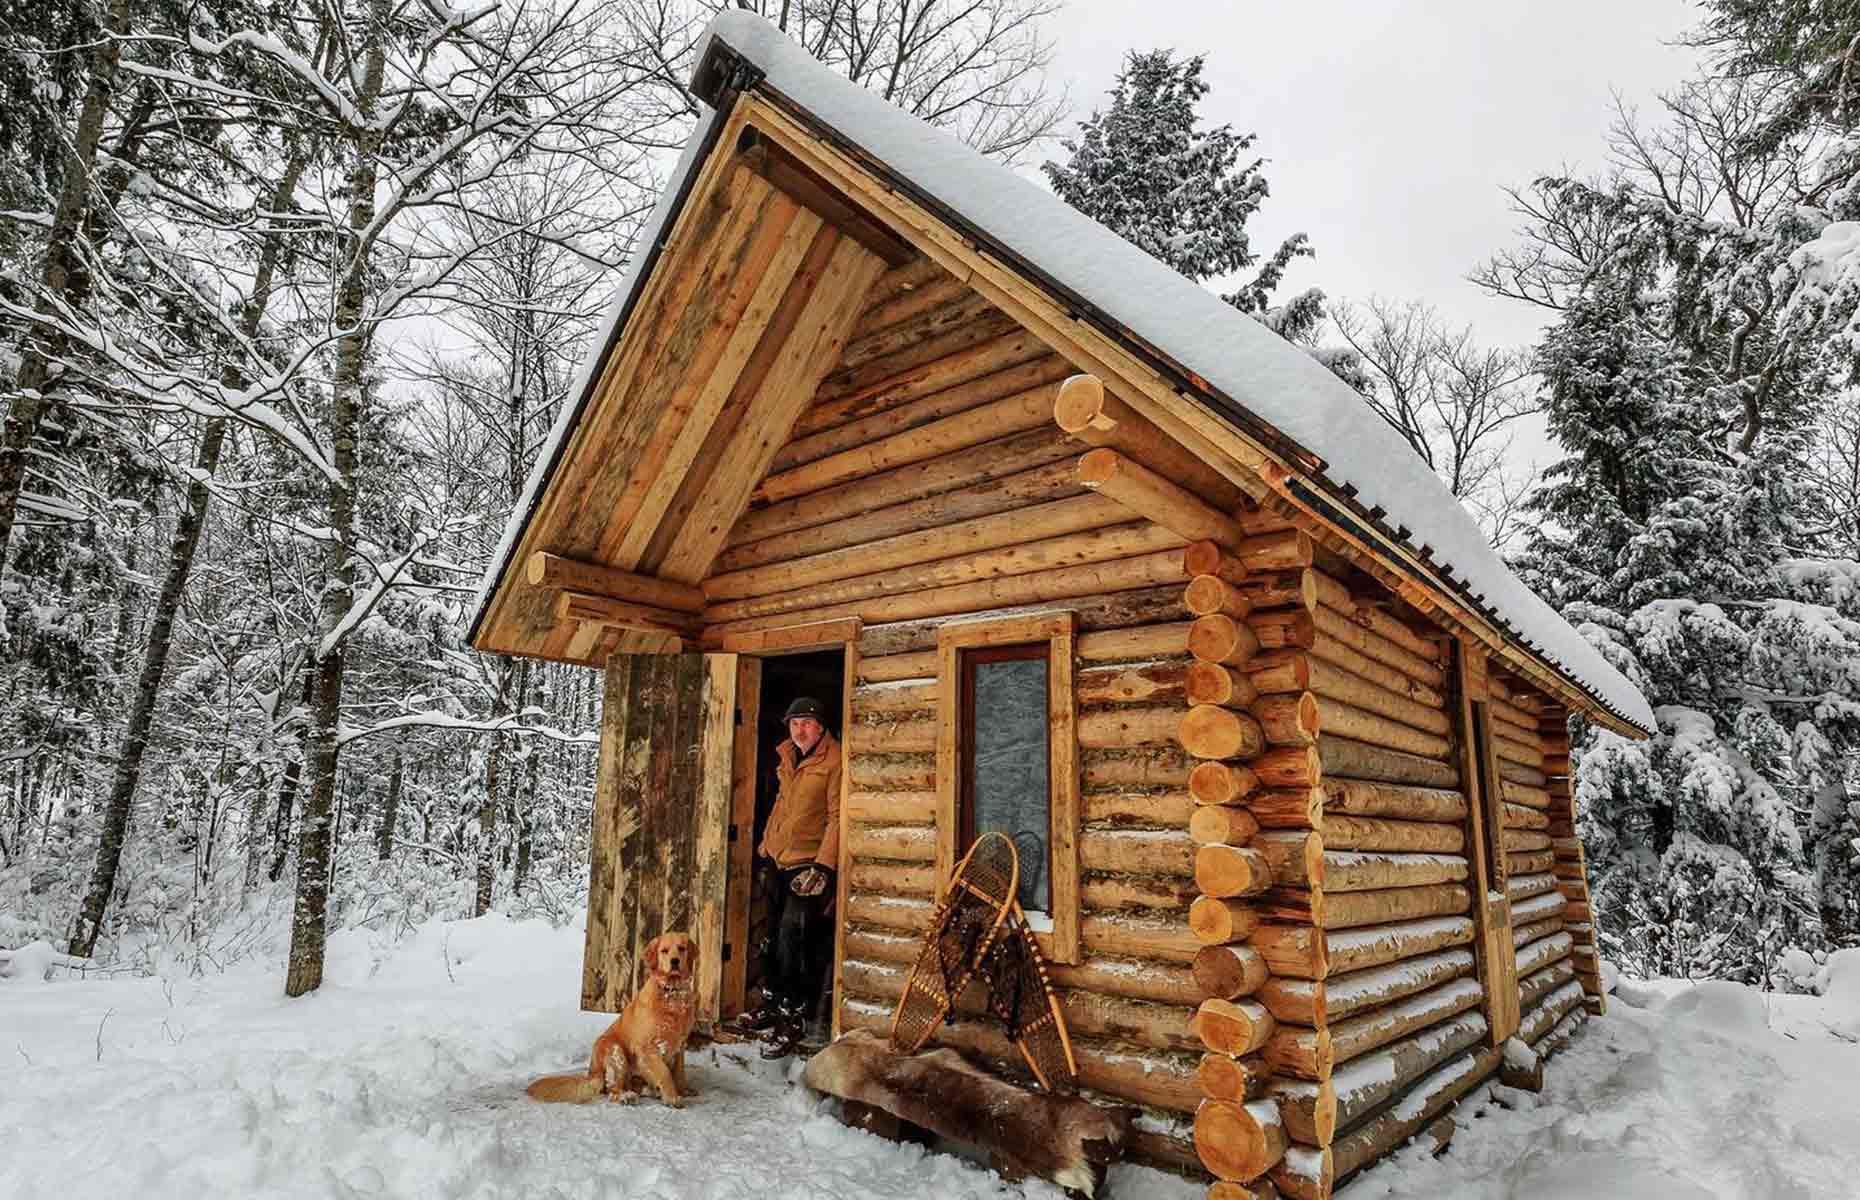 <p>Hidden in the snowy Canadian wilderness lies a woodland cabin built by outdoorsman and self-reliance coach Shawn James. Shawn has since moved into another remote log-built home, but he lived in this isolated property with his dog for years.</p>  <p>While Shawn's wife and daughters spend time with him in the wilderness, he maintains a mostly secluded existence, foraging for wild food and relying on his well-honed survival skills. Shawn shares his way of life through his <a href="https://www.instagram.com/myselfreliance/">Instagram channel</a> and website, <a href="https://myselfreliance.com/">My Self Reliance</a>.</p>